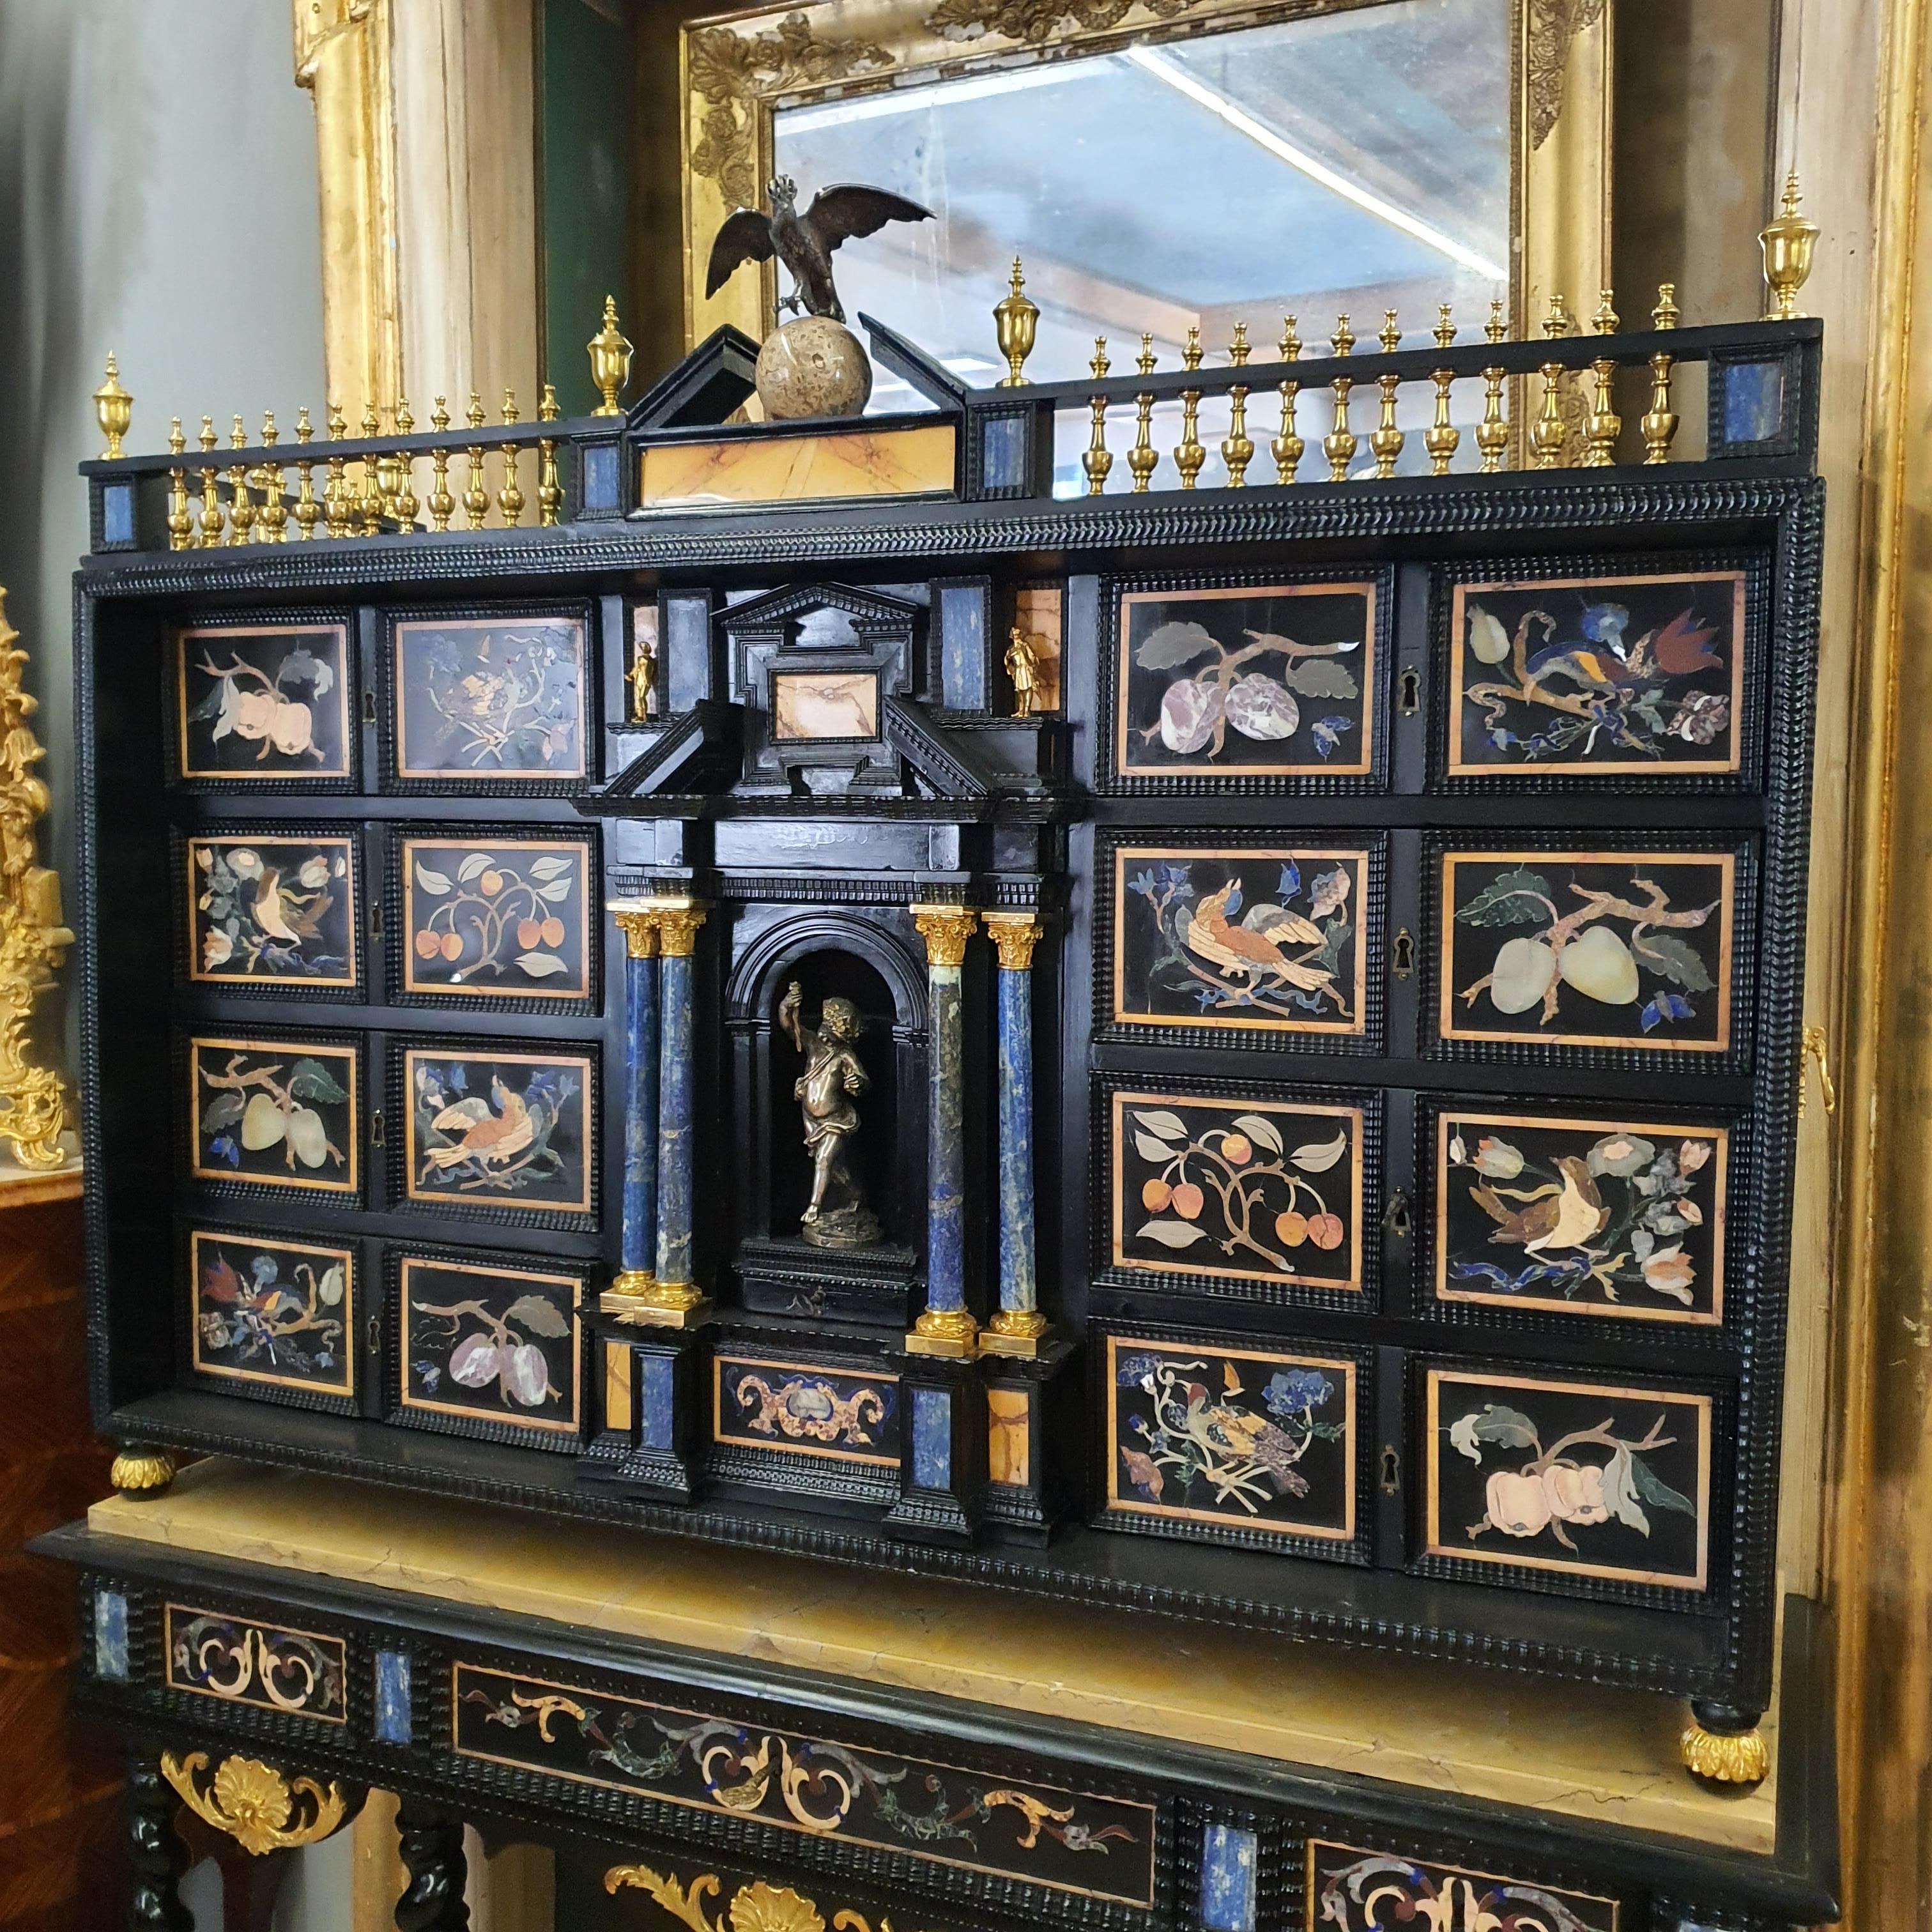 Prestigious Italian cabinet on stand with semi-precious stones, gilded bronze and silver.
Furniture made of wood veneered in ebony, tiles inlaid with semi-precious stones adorn the front of the furniture in which we also find four columns in lapis